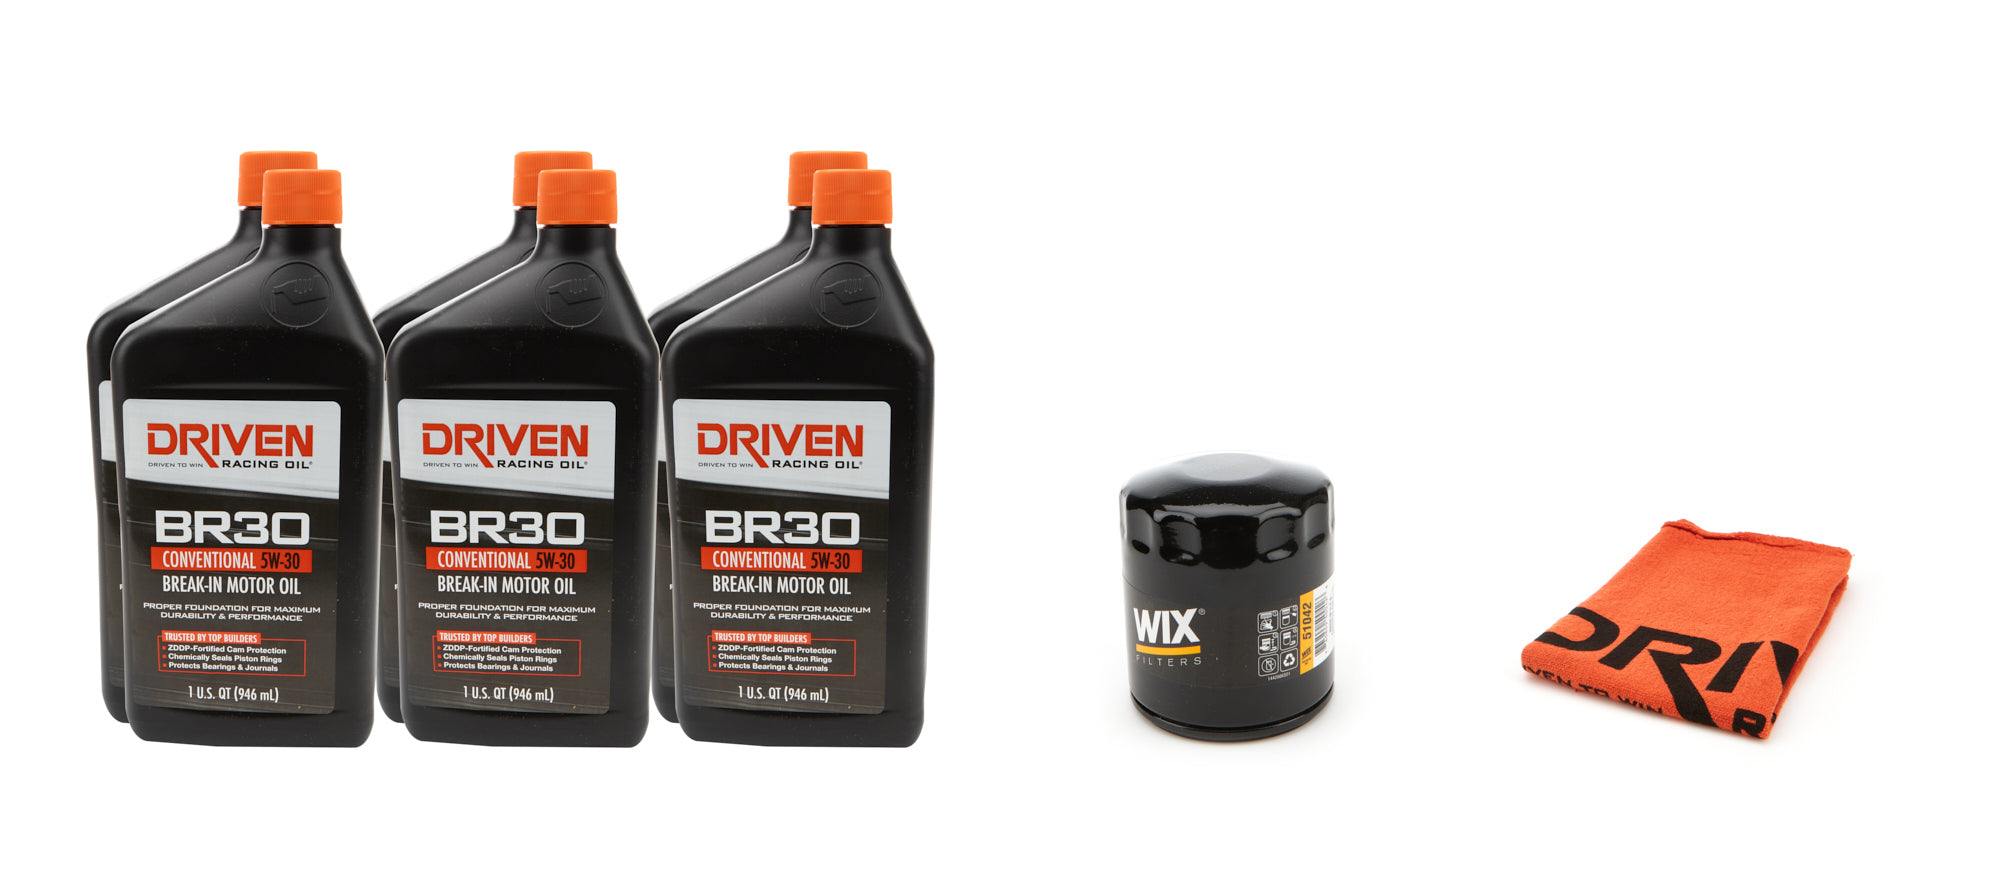 Driven Racing Oil 5W30 Oil Change Kit 97-06 GM LS Engine Oils, Fluids and Additives Motor Oil main image